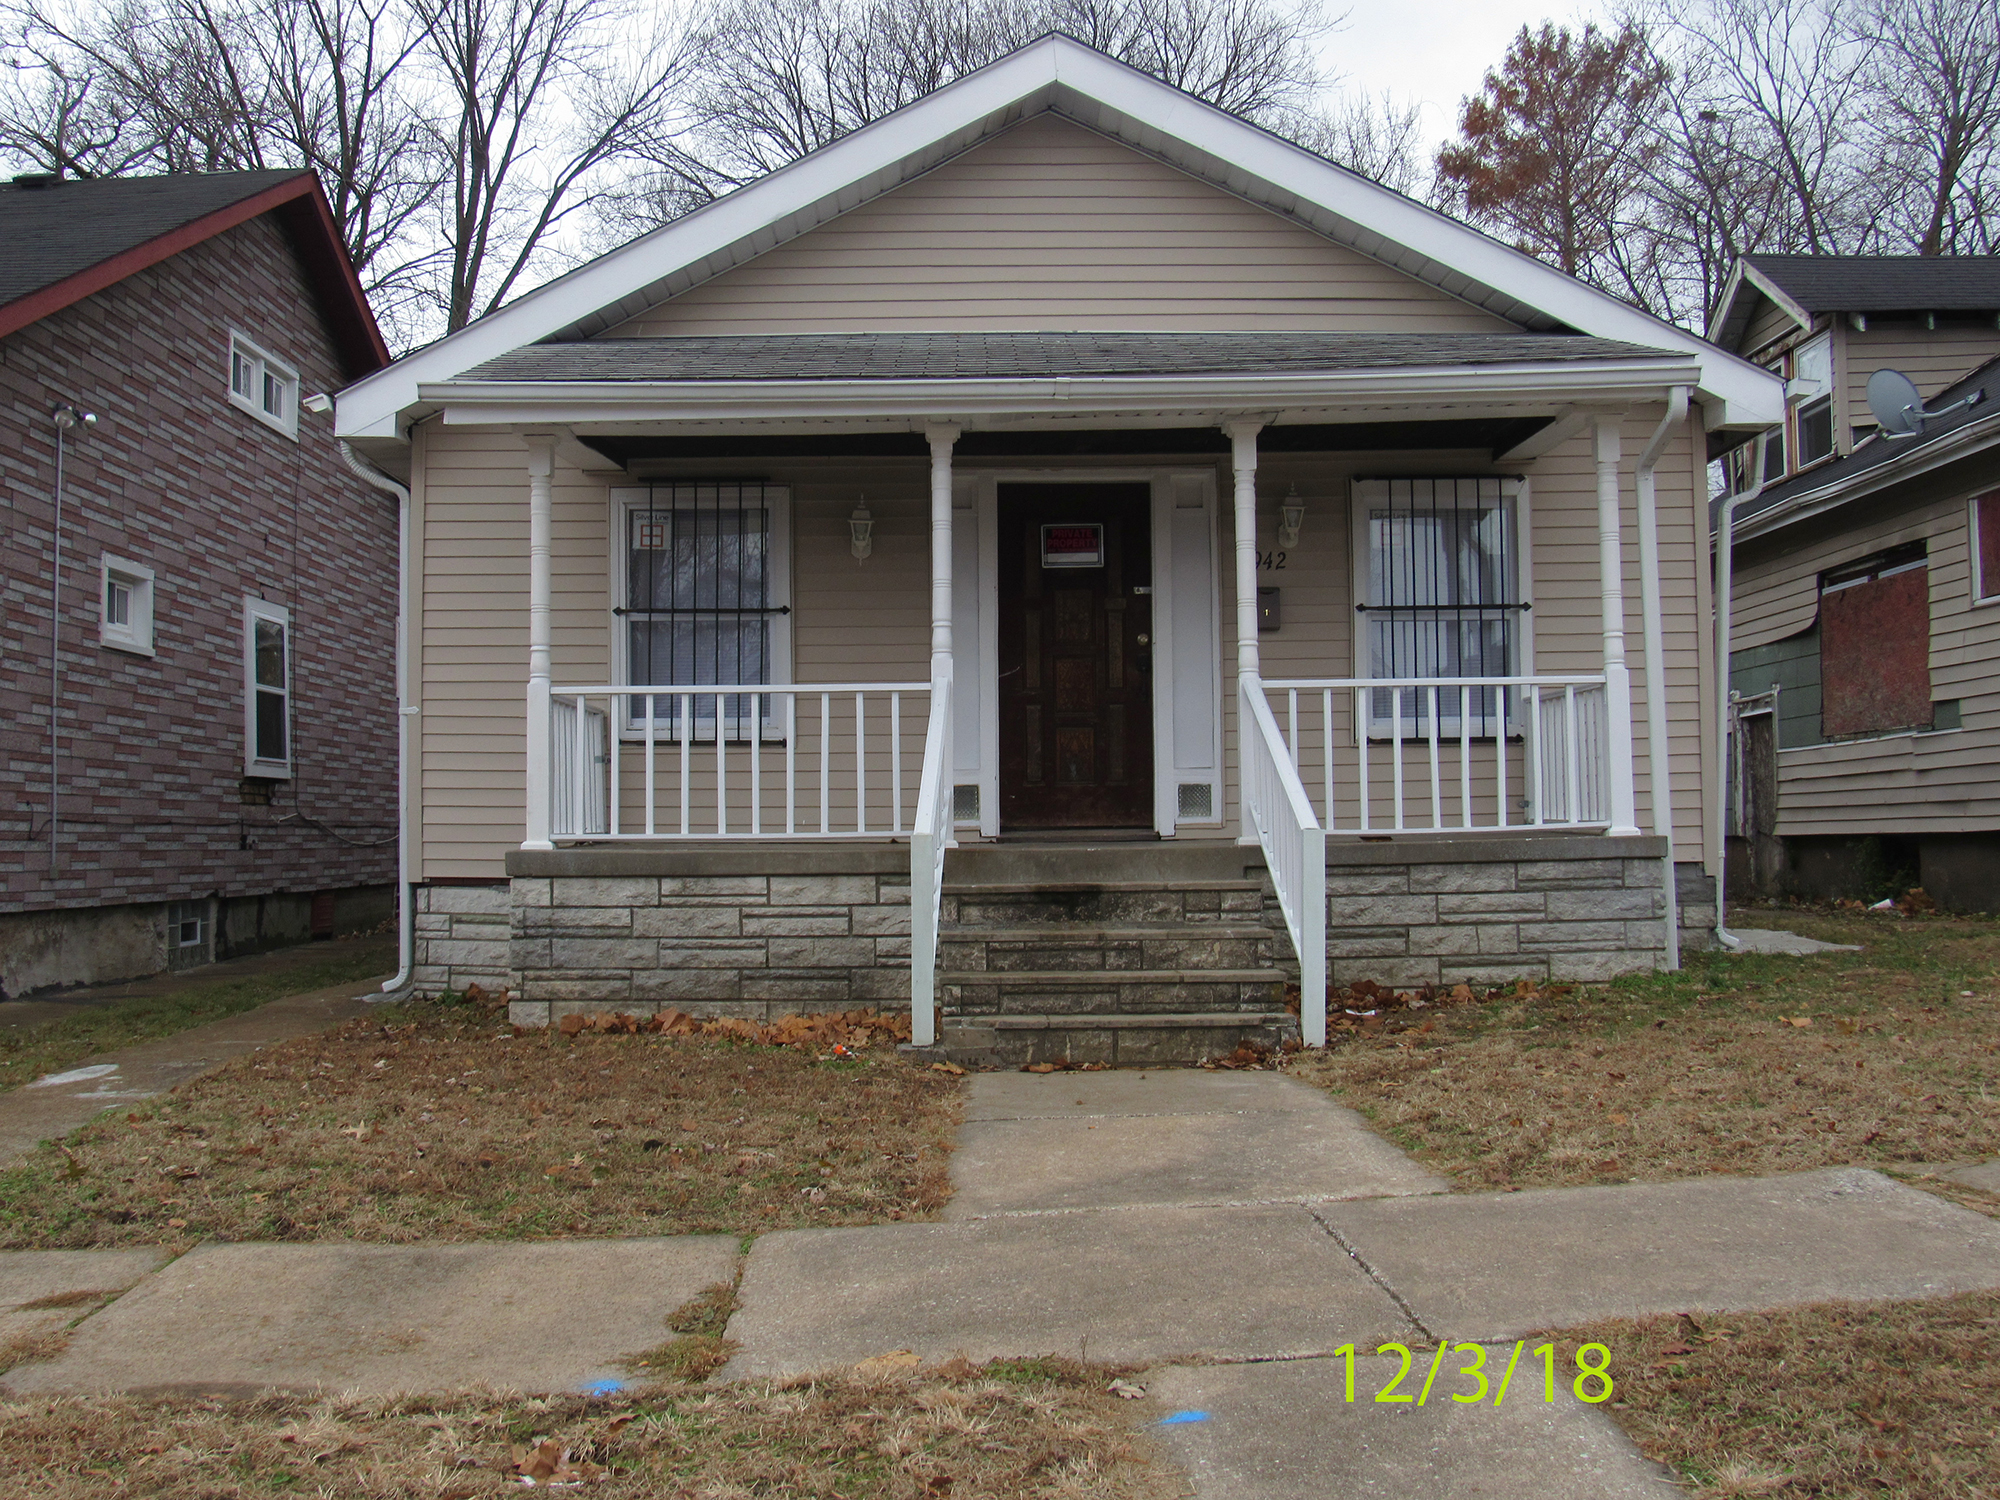 5942 Harney ave - After LRA